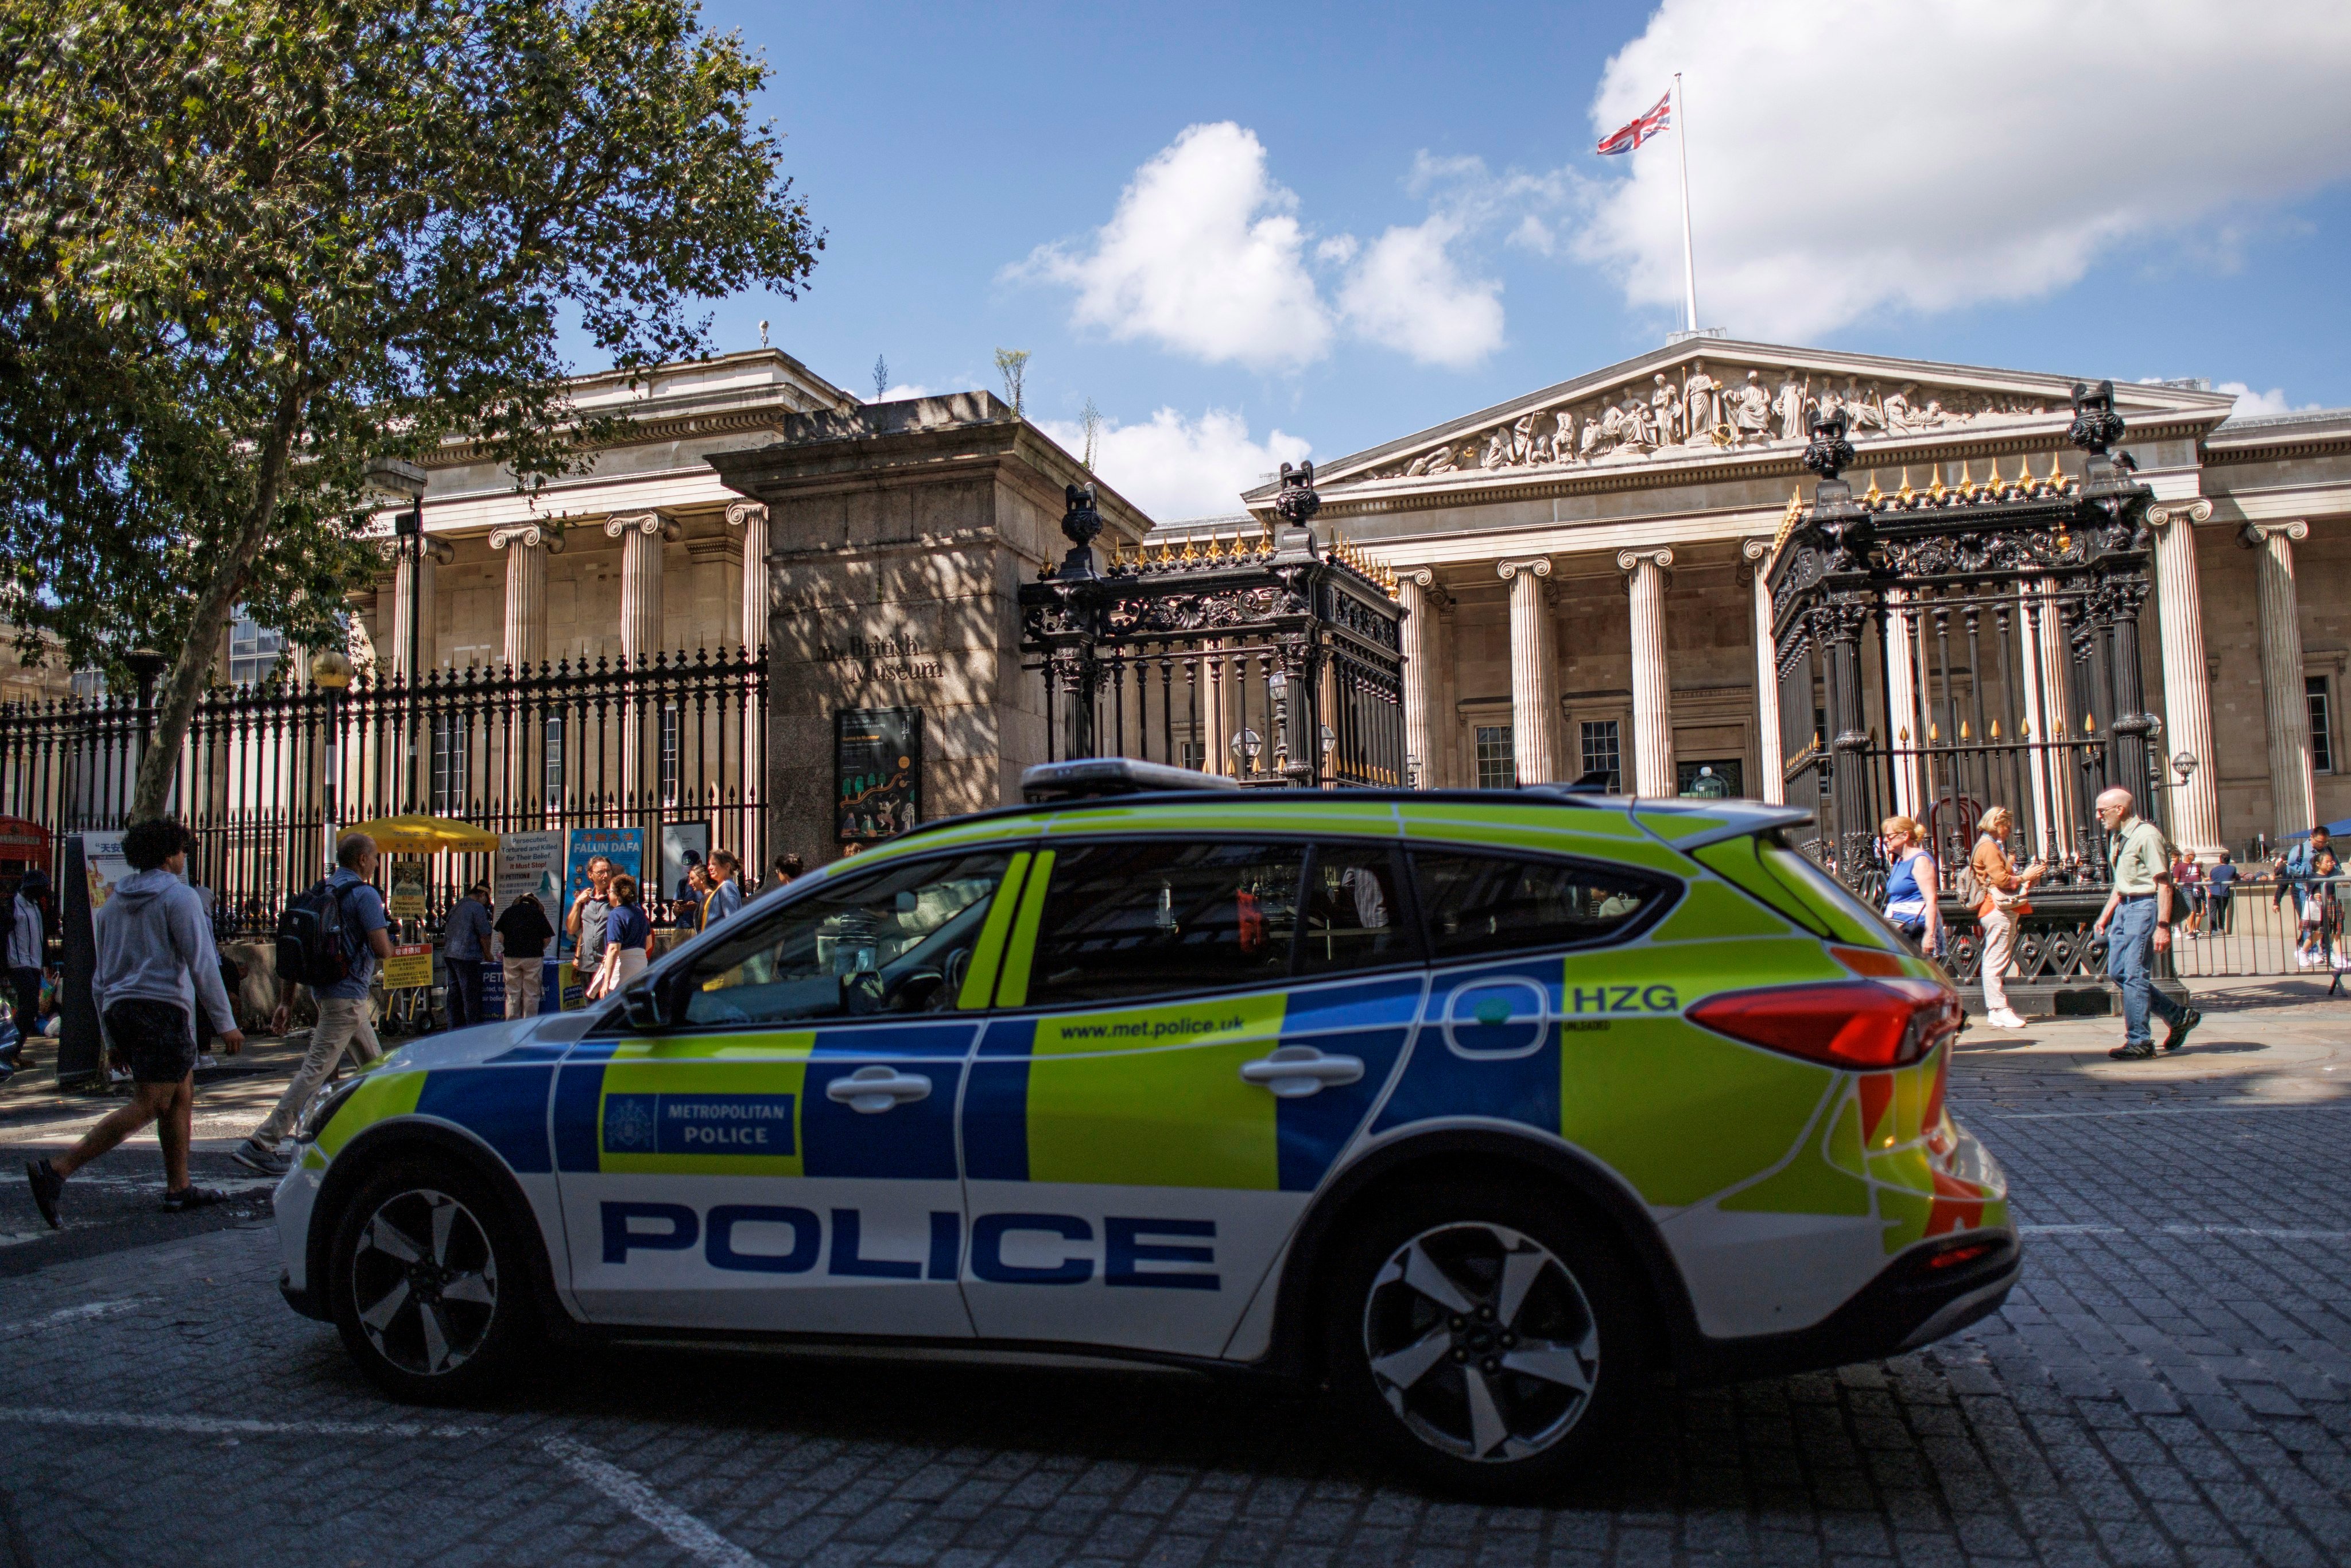 A police car patrols outside the British Museum in London, UK. Photo: EPA-EFE/